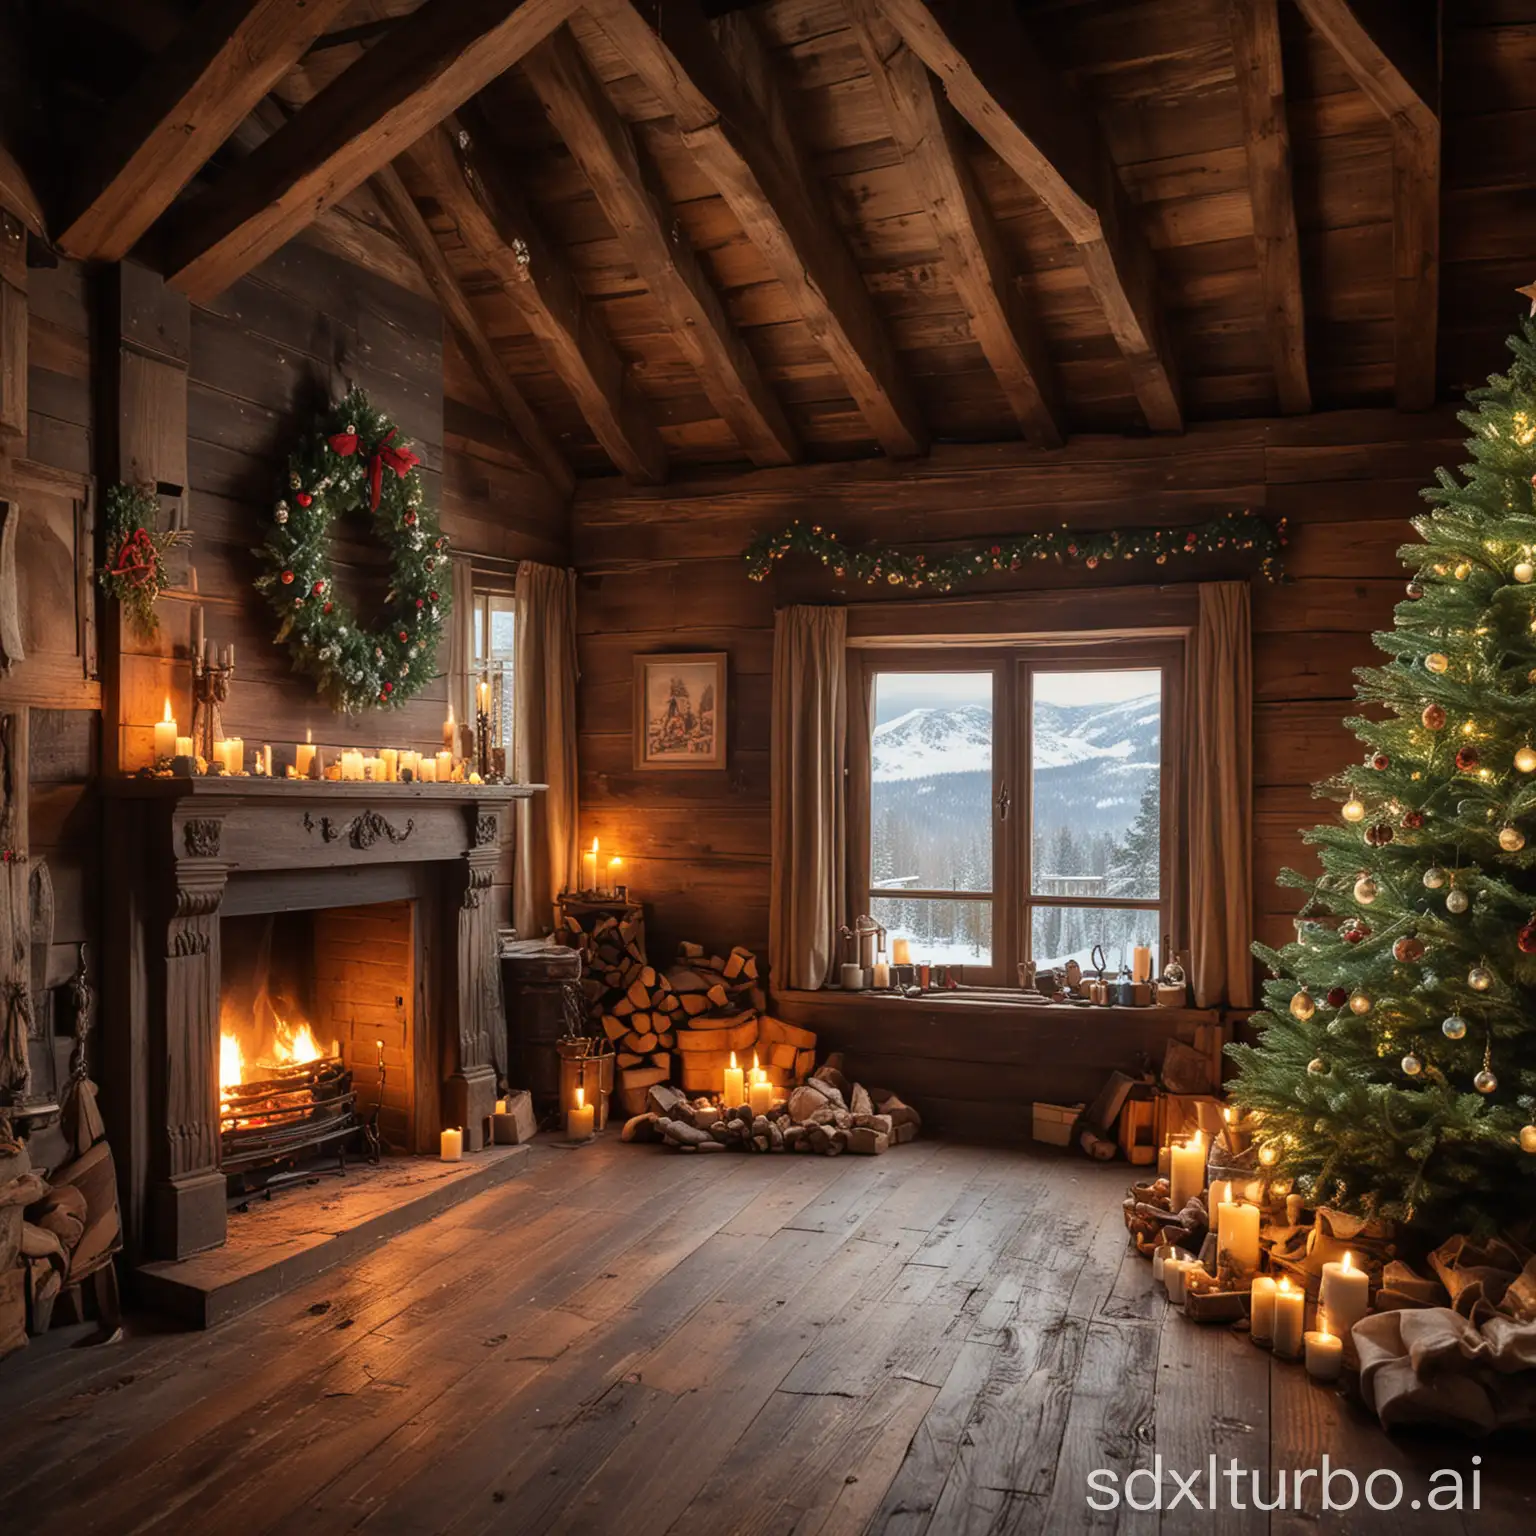 Cozy-Christmas-Scene-Old-Wooden-Room-with-Fireplace-and-Mountain-View